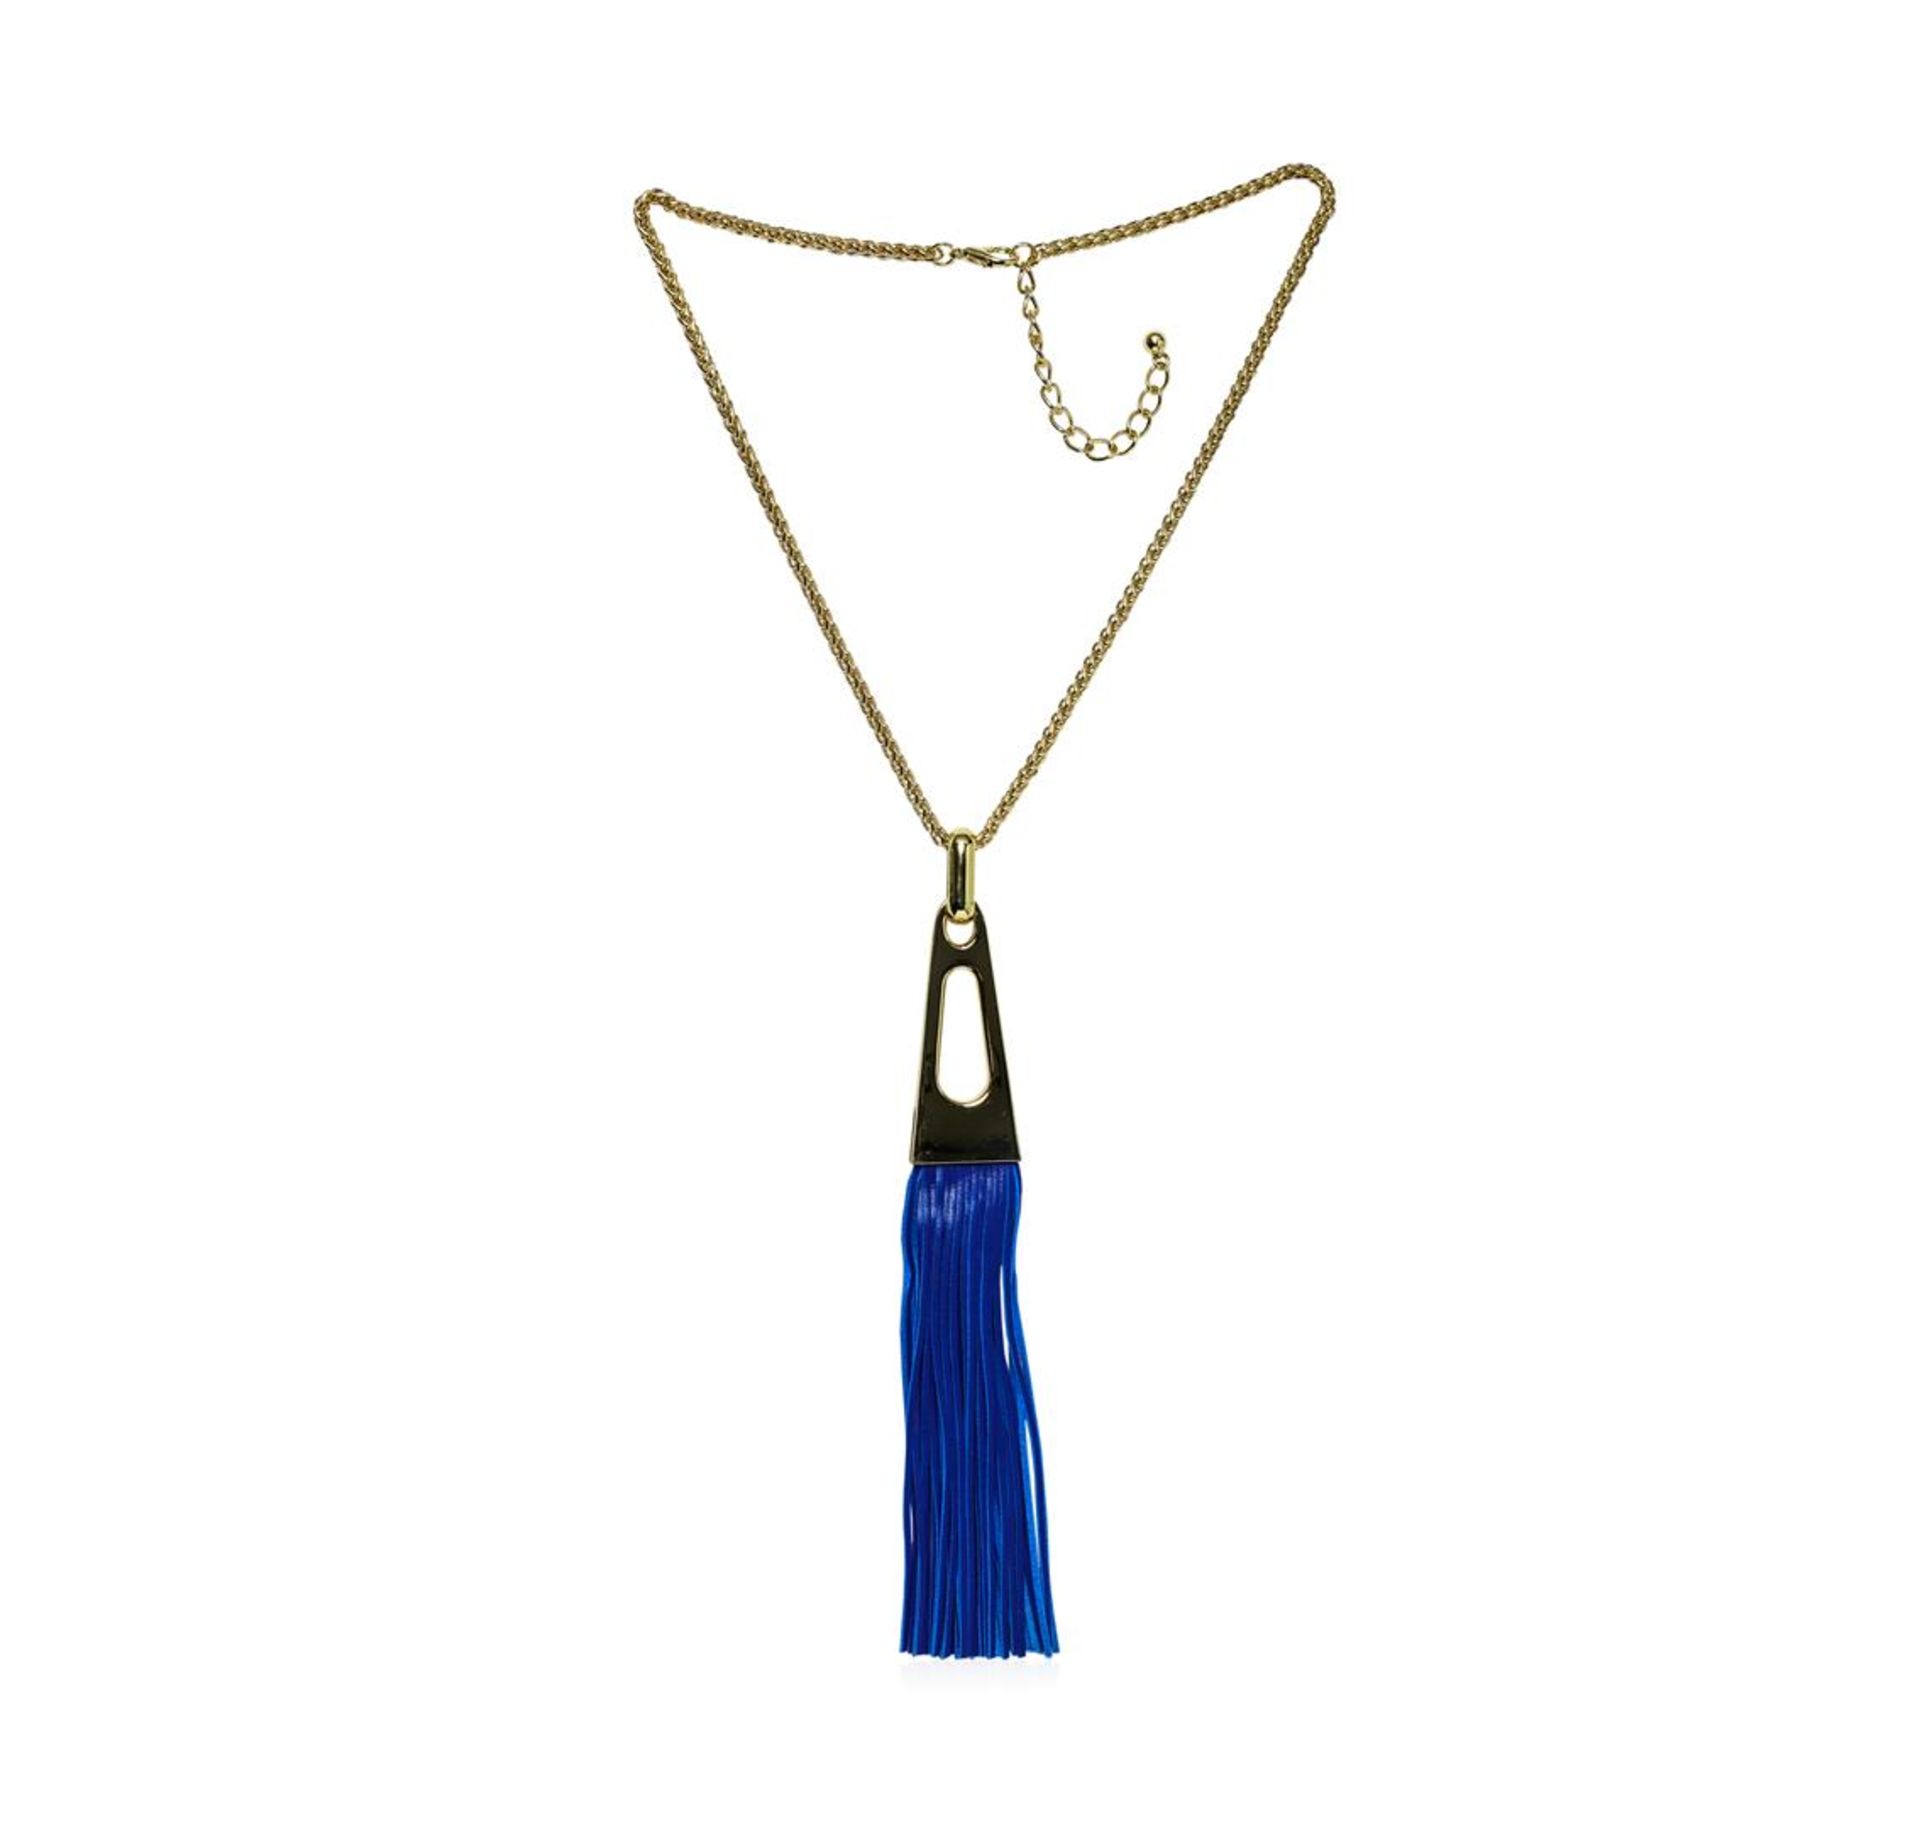 Leather Tassel Chain Necklace - Gold Plated - Image 2 of 2